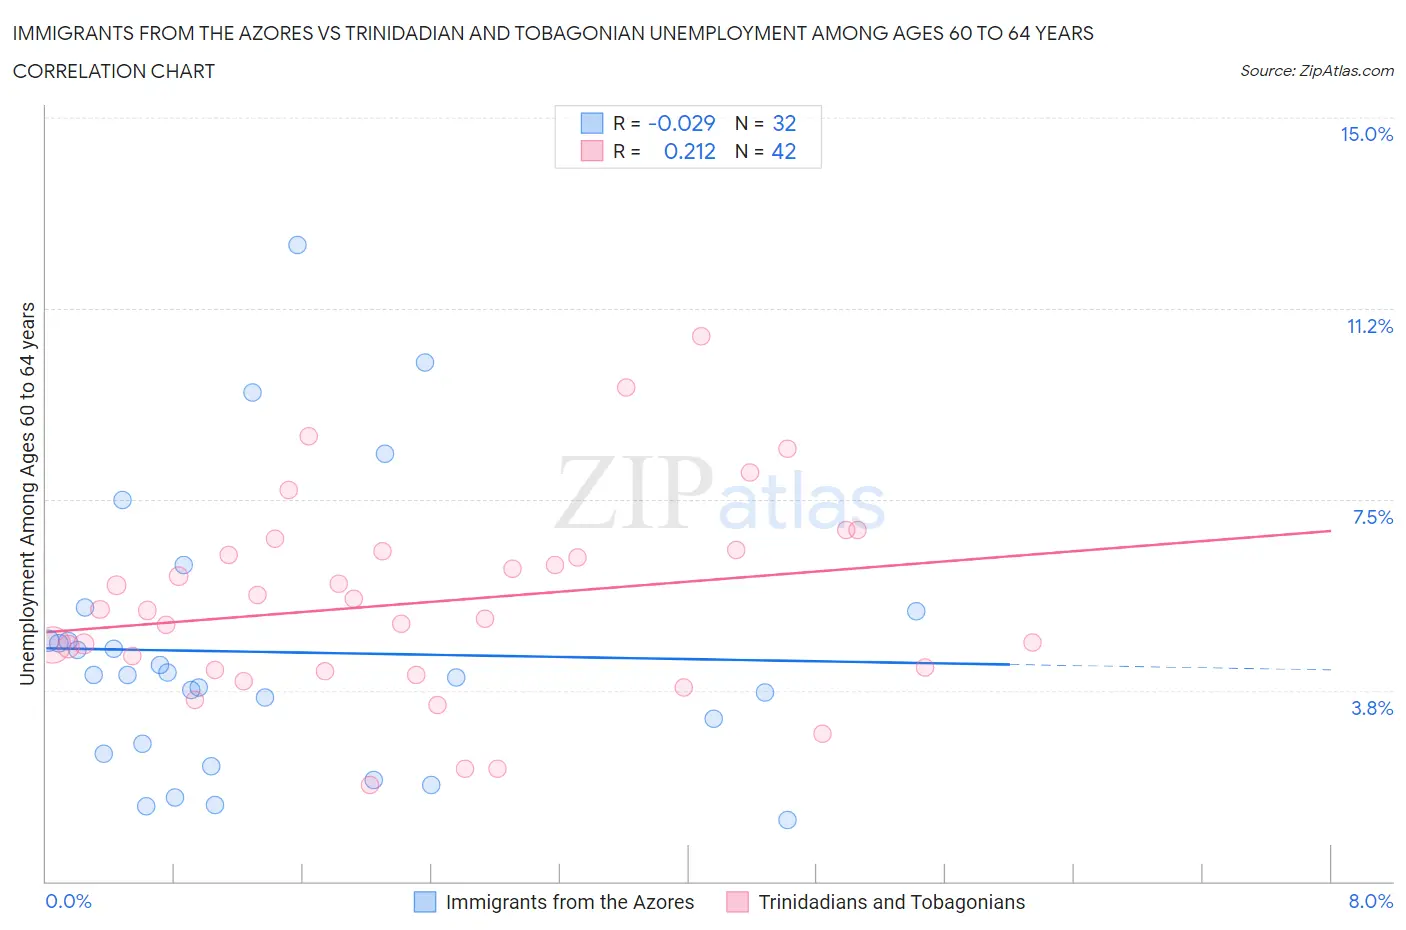 Immigrants from the Azores vs Trinidadian and Tobagonian Unemployment Among Ages 60 to 64 years